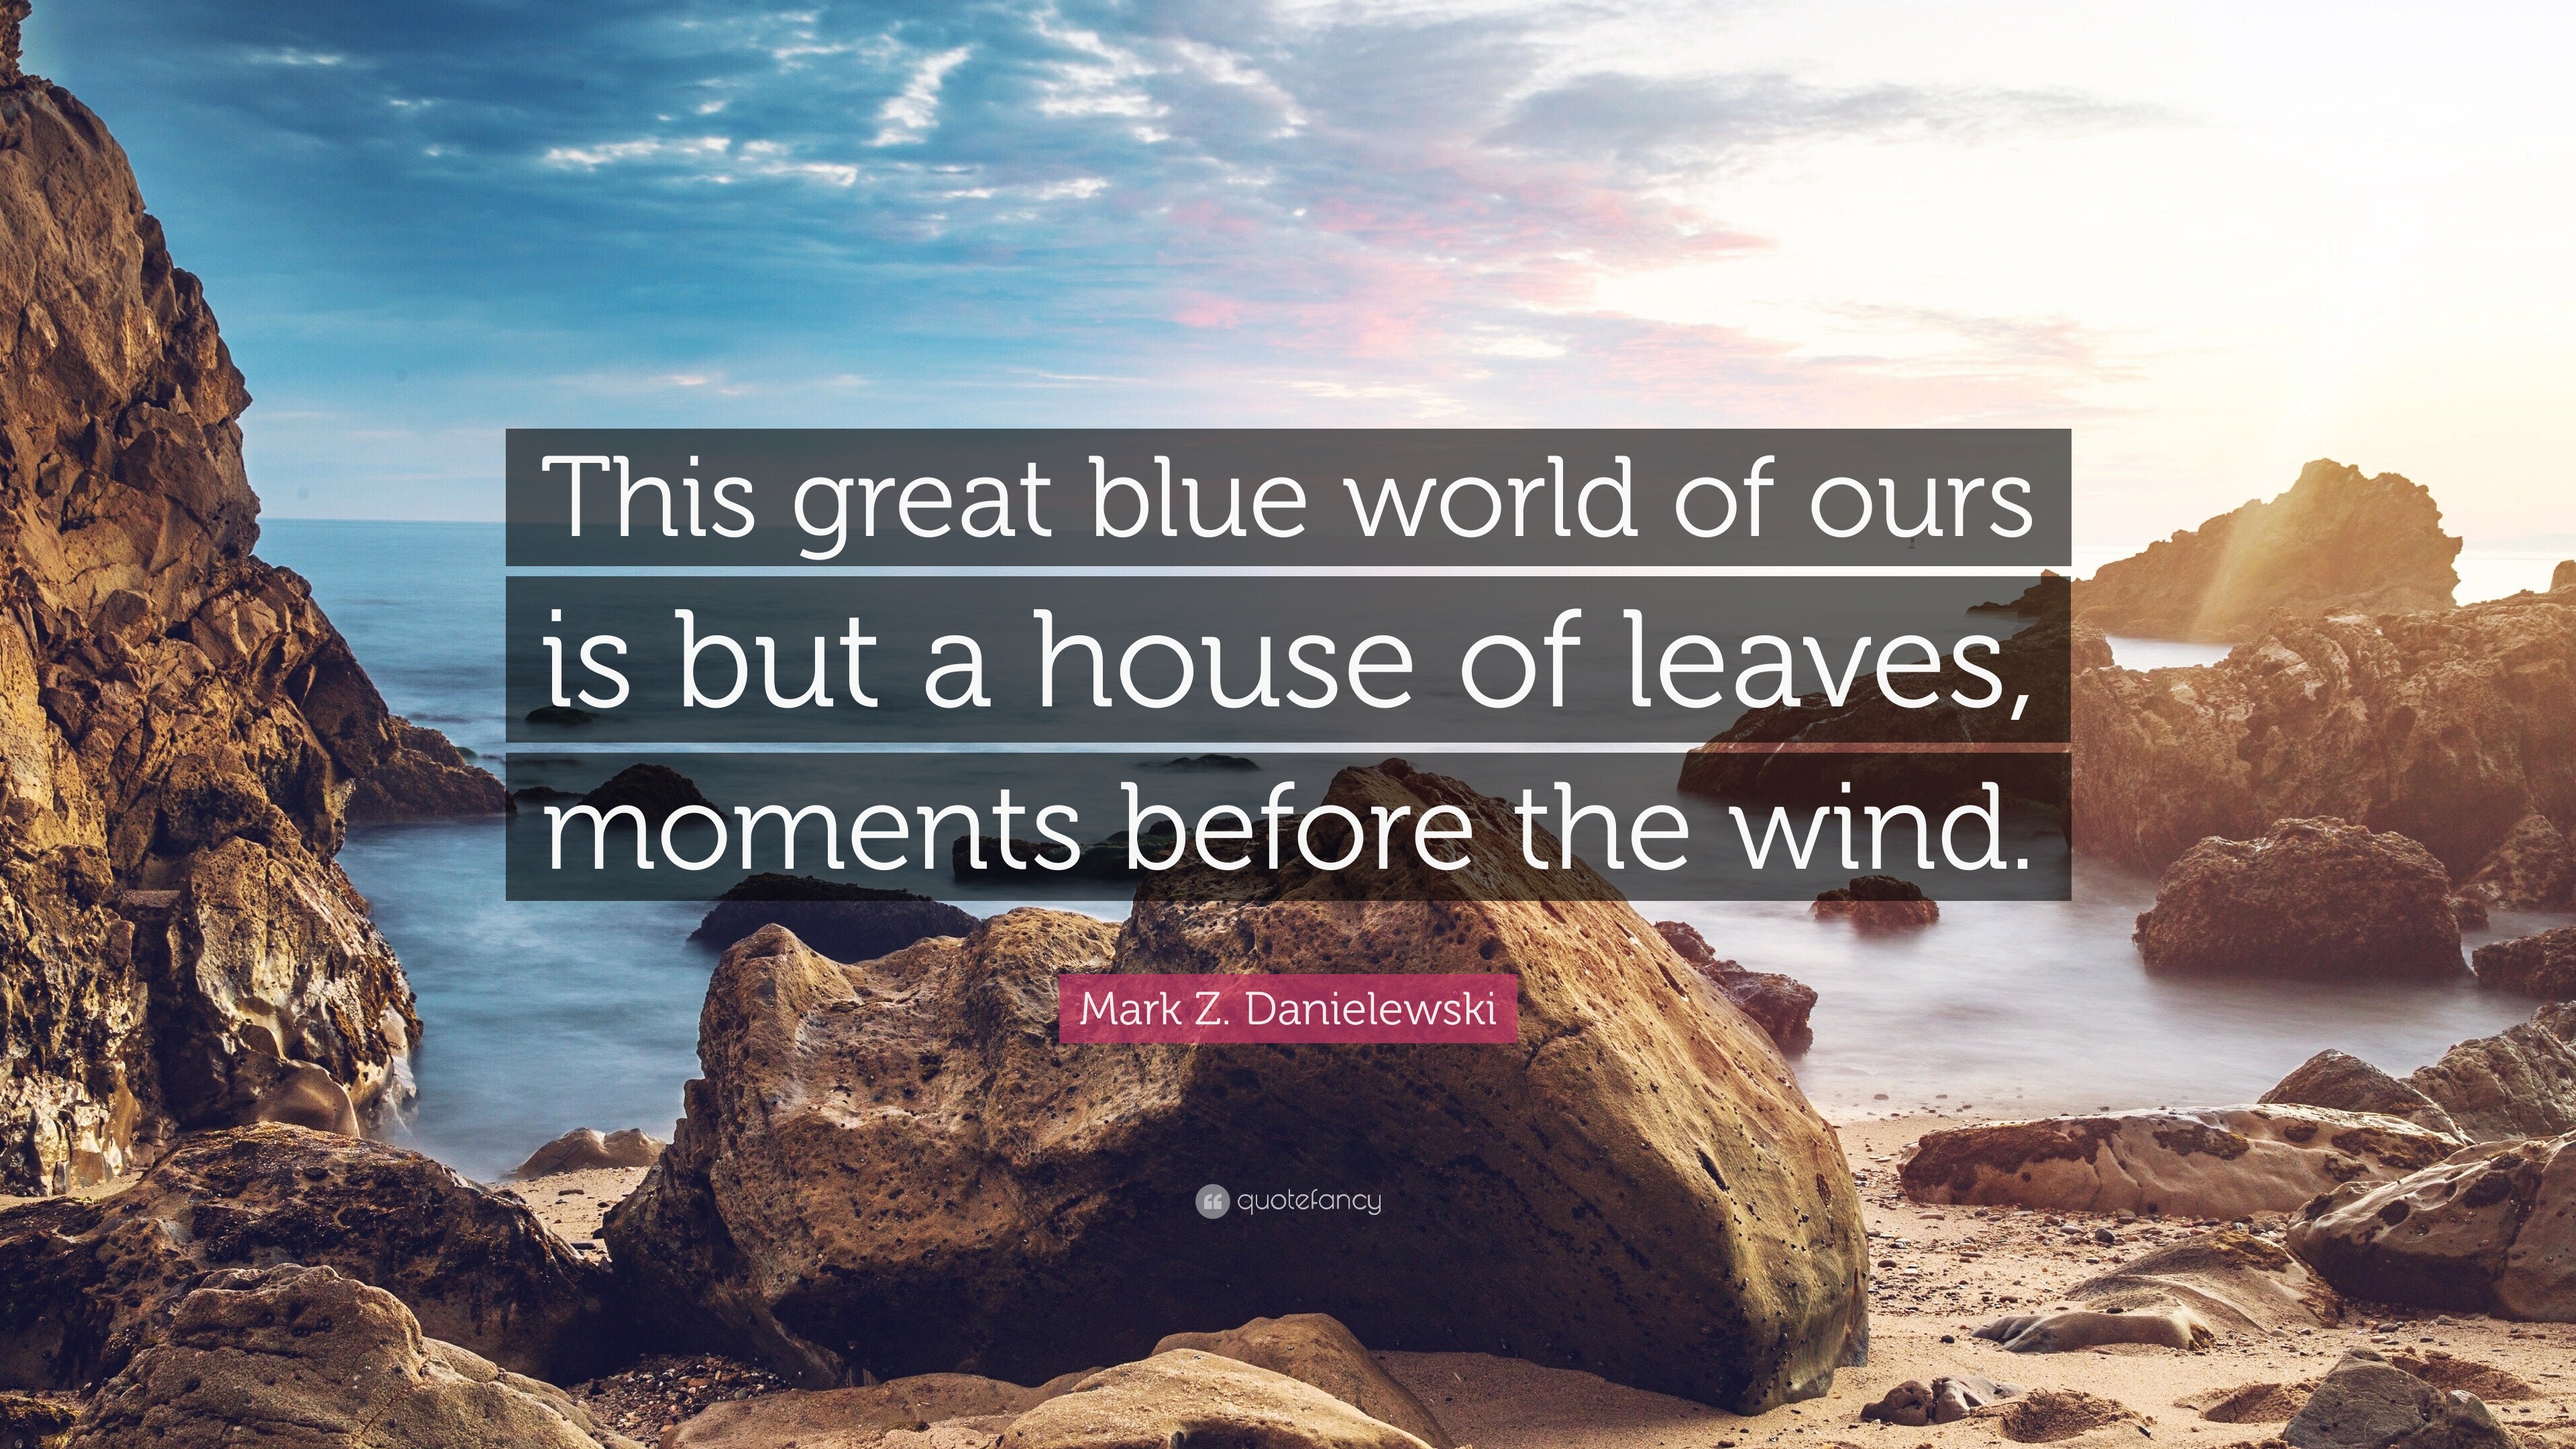 Mark Z Danielewski Quote This Great Blue World Of Ours Is But A House Of Leaves